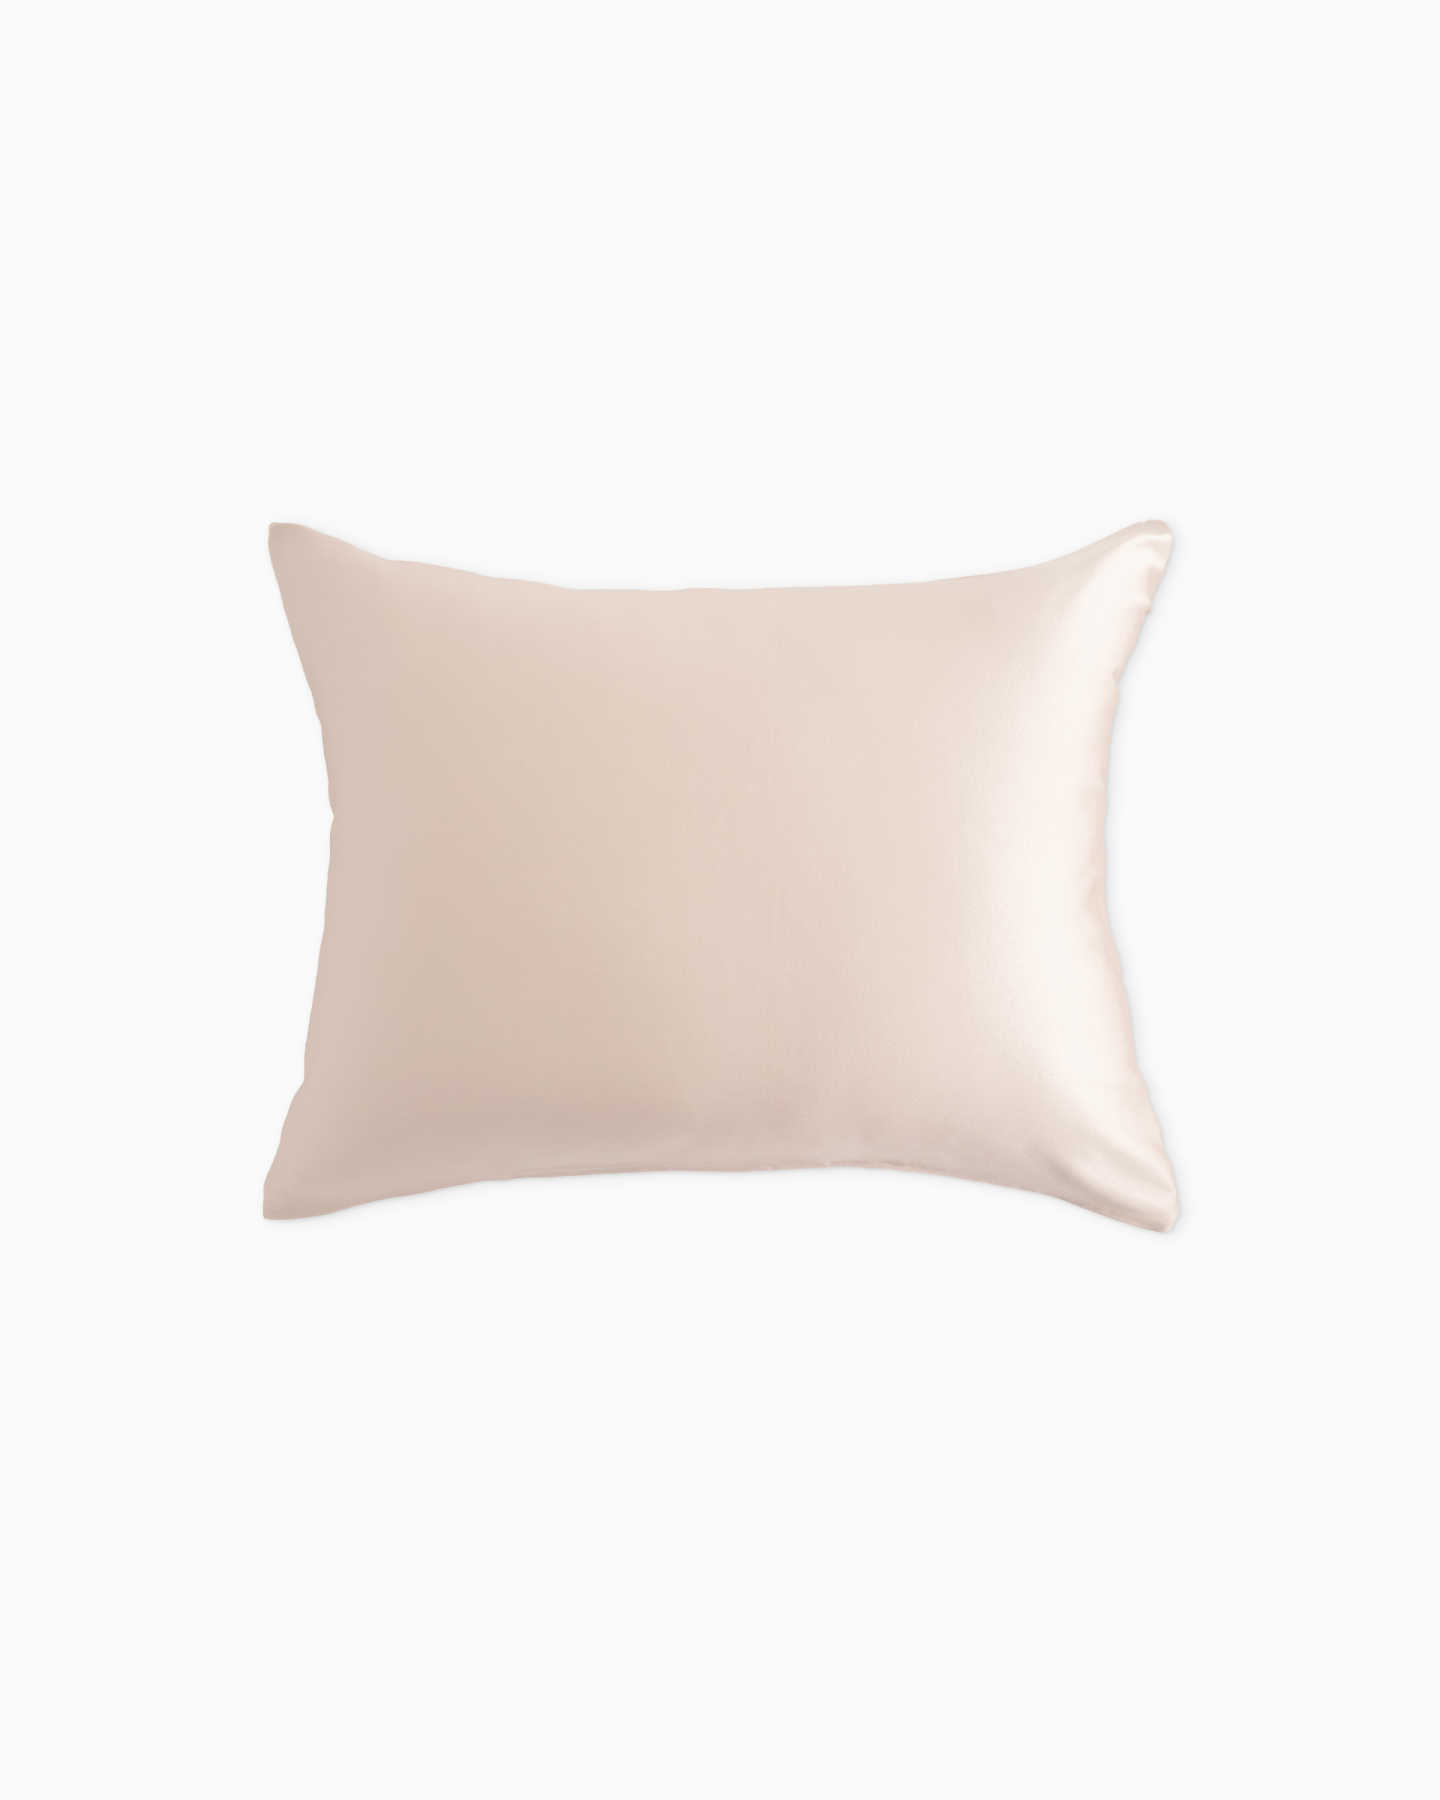 You May Also Like - Mulberry Silk Beauty Sleep Pillowcase - Champagne